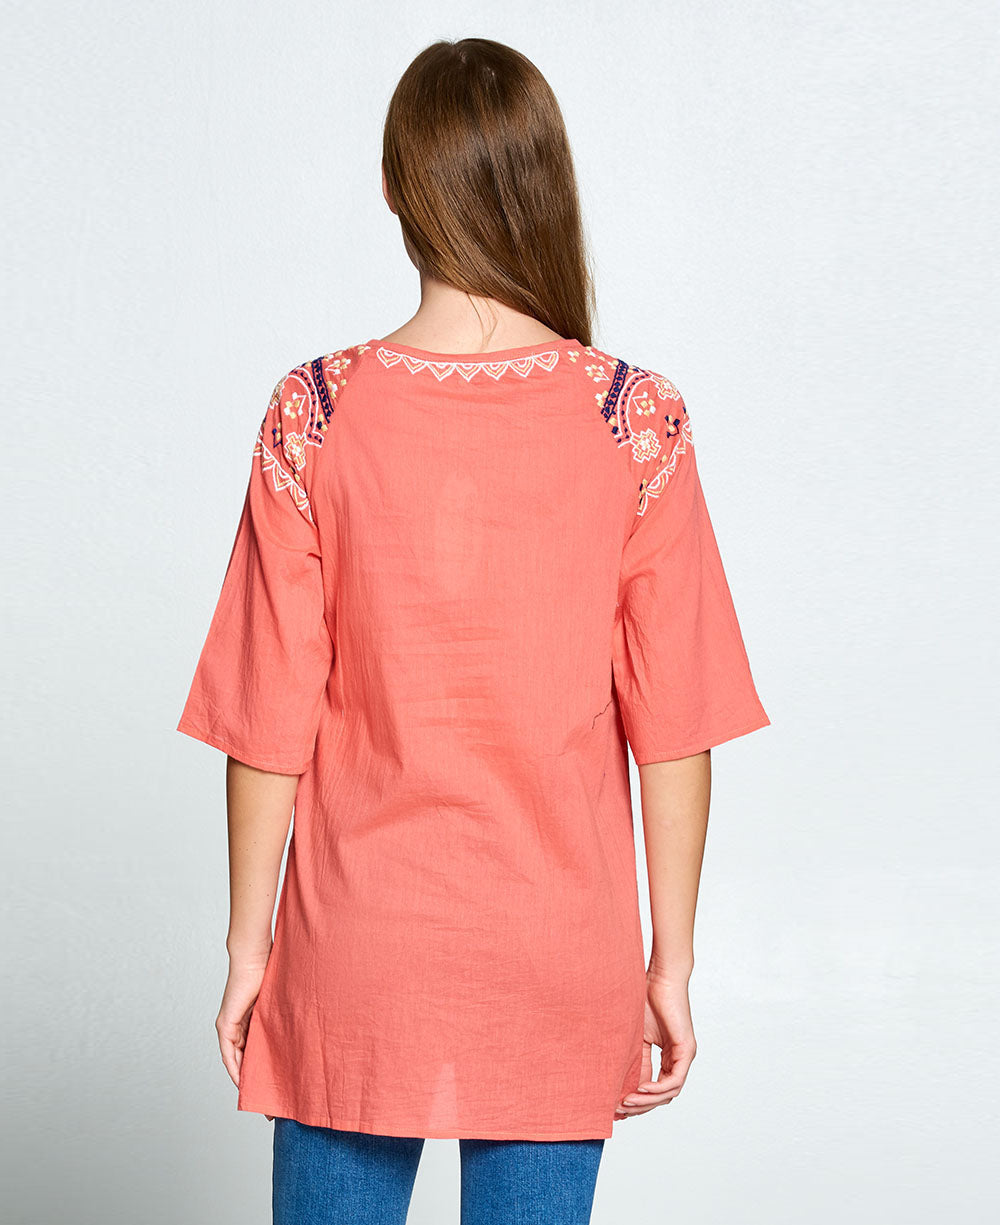 Tunic in pink